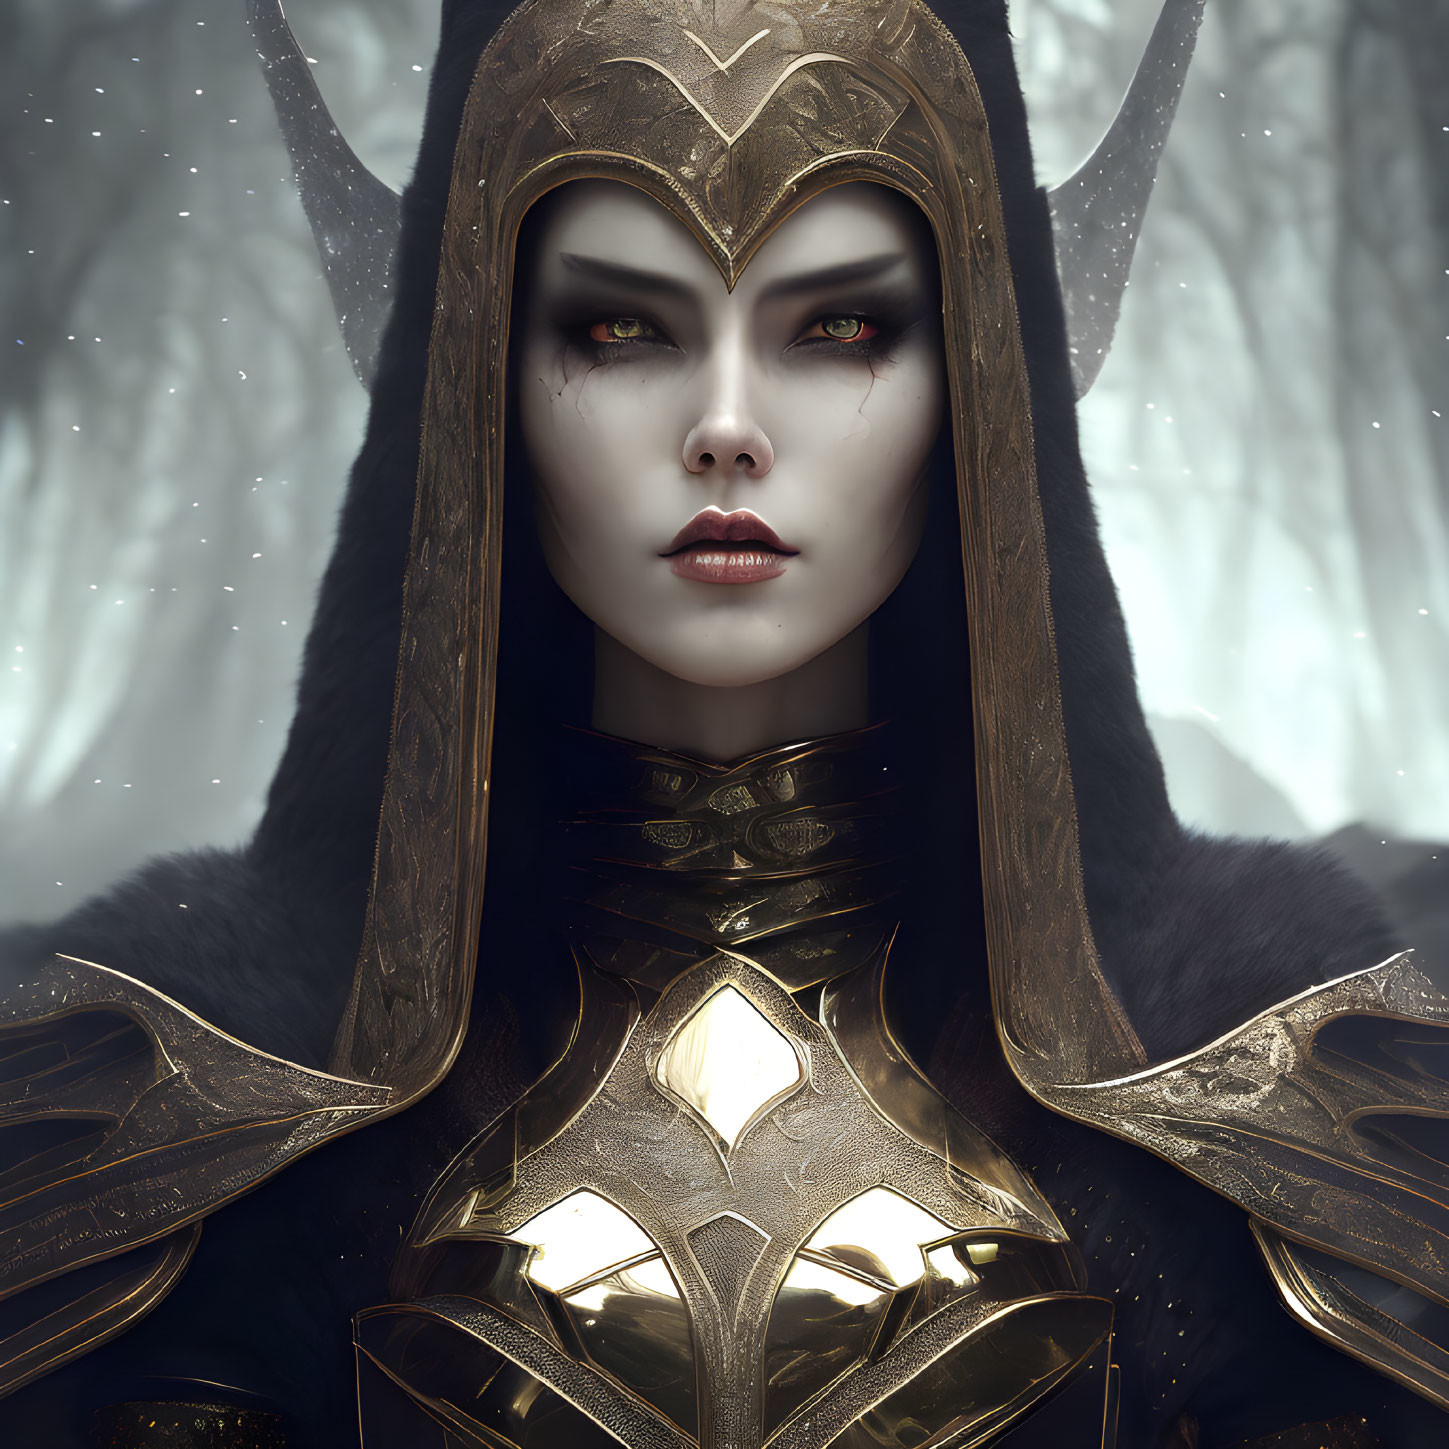 Female figure with red eyes, pale skin, and golden armor in snowy setting